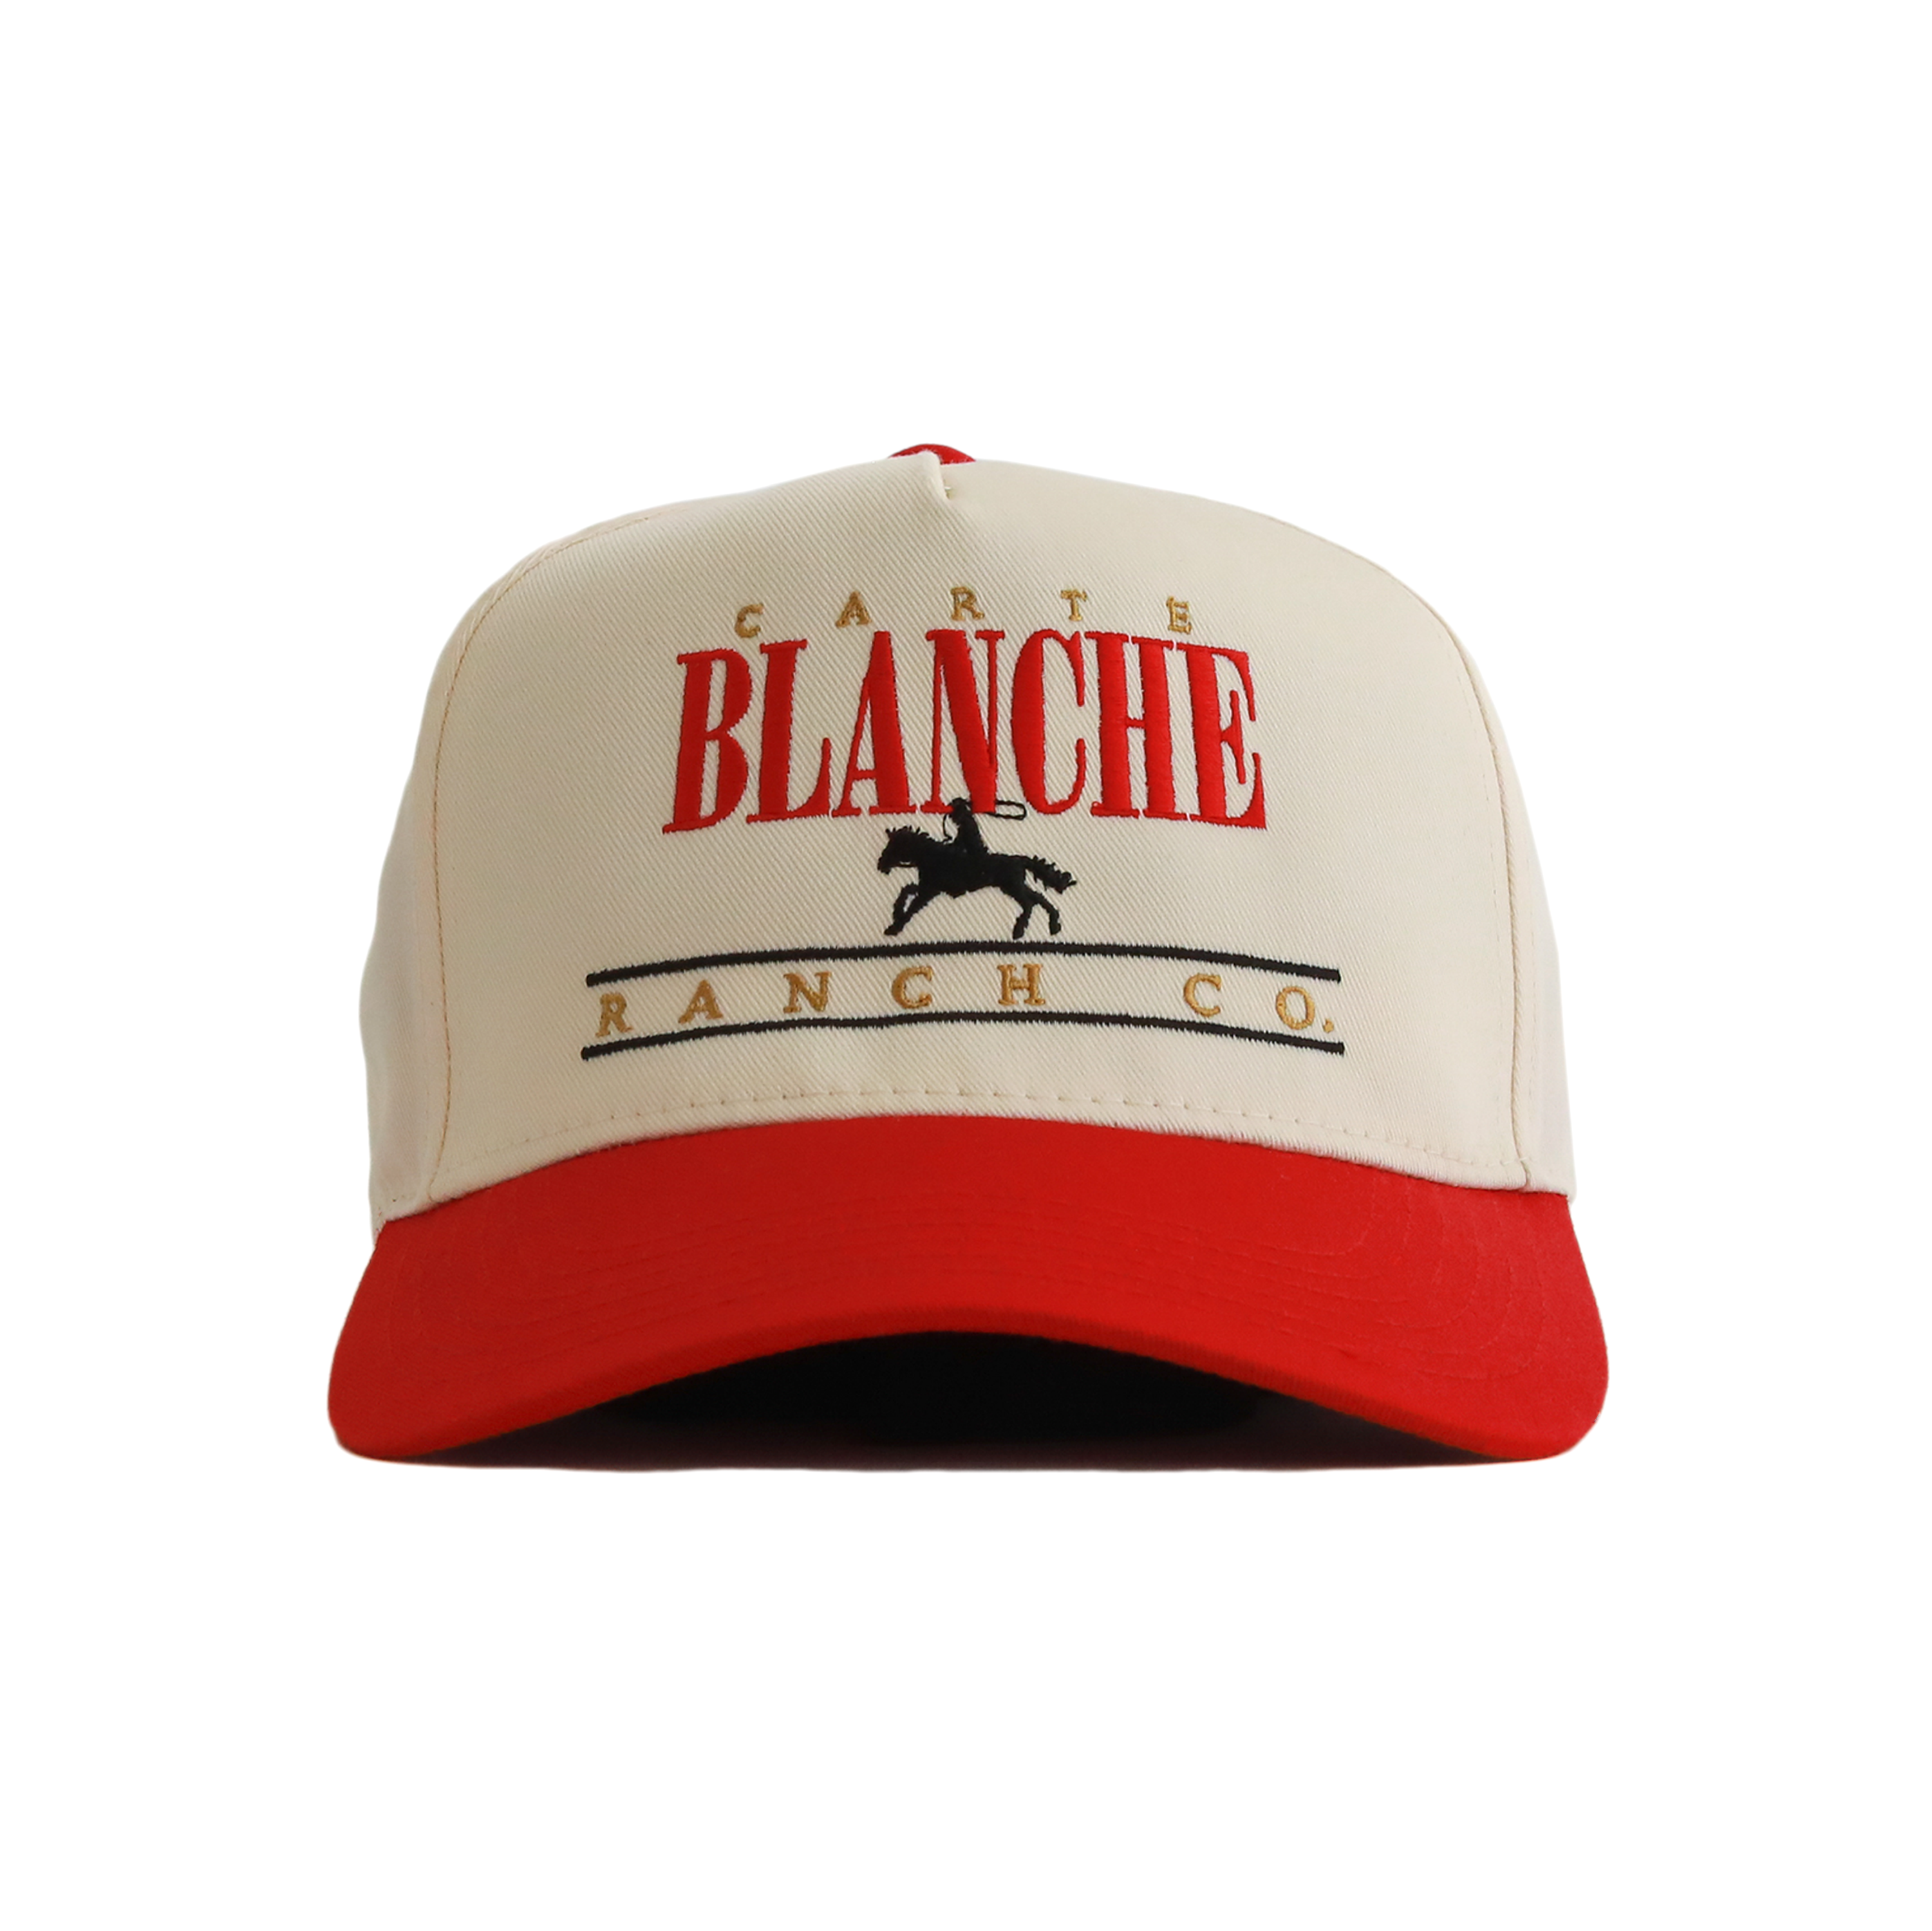 The 008 Signature Ranch Snapback // Red & Créme